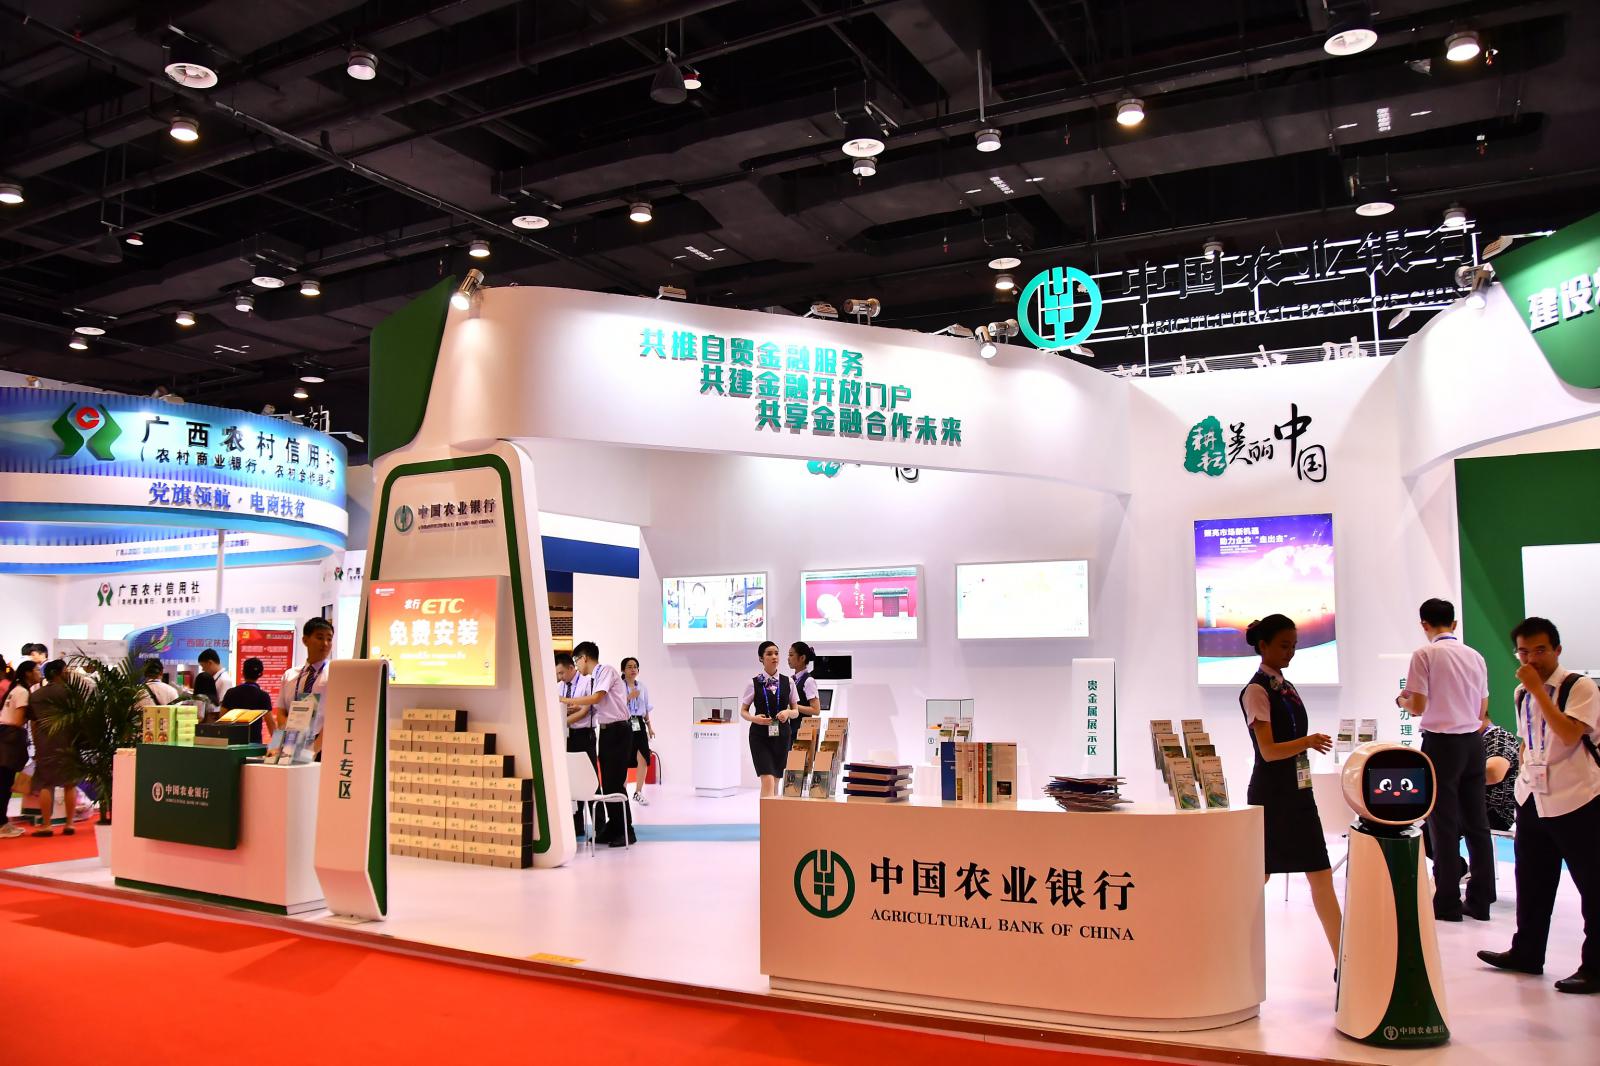 Financial service exhibition in the CAEXPO